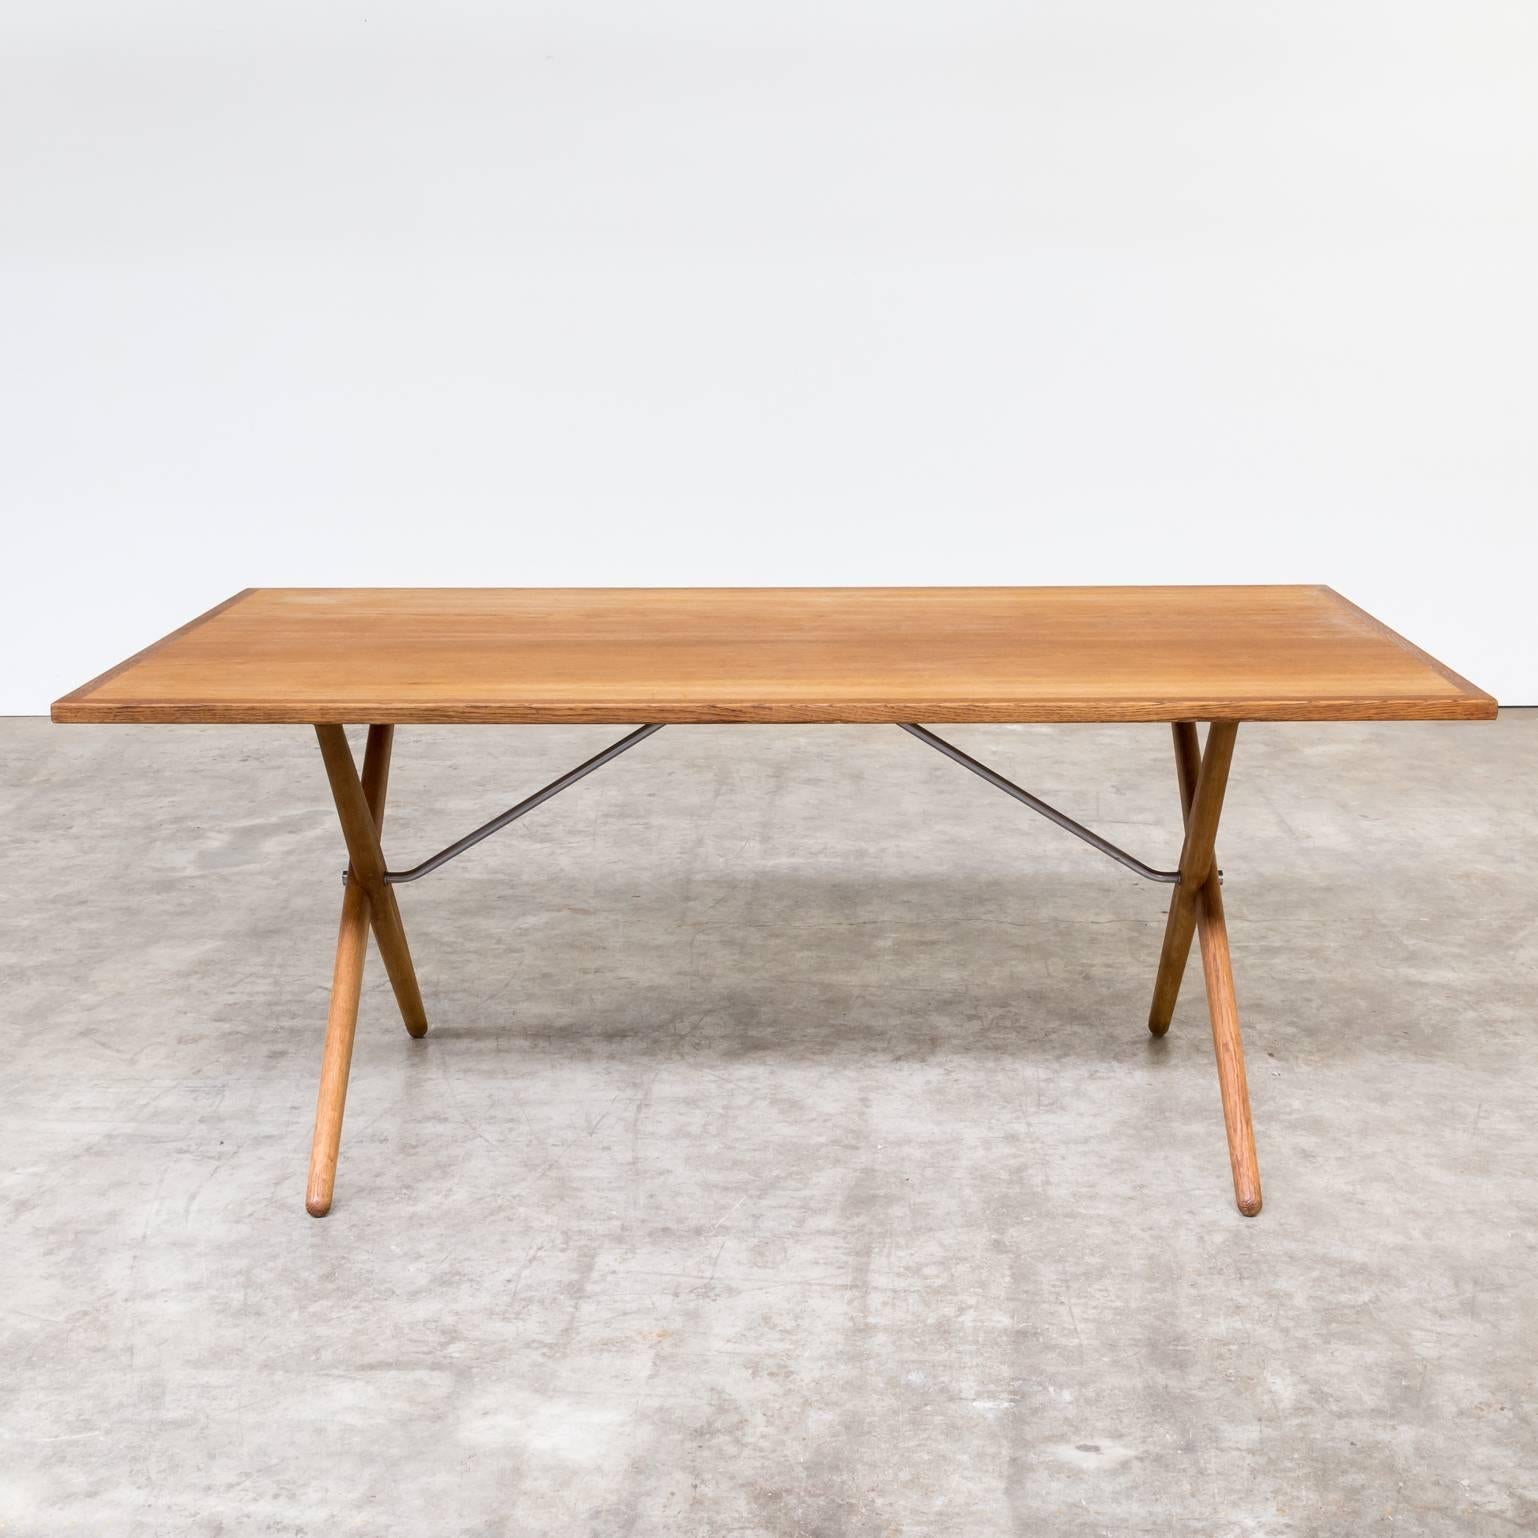 60s Hans J. Wegner ‘AT-303’ dining table for Andreas Tuck. Beautiful crossed legs table in very good condition.